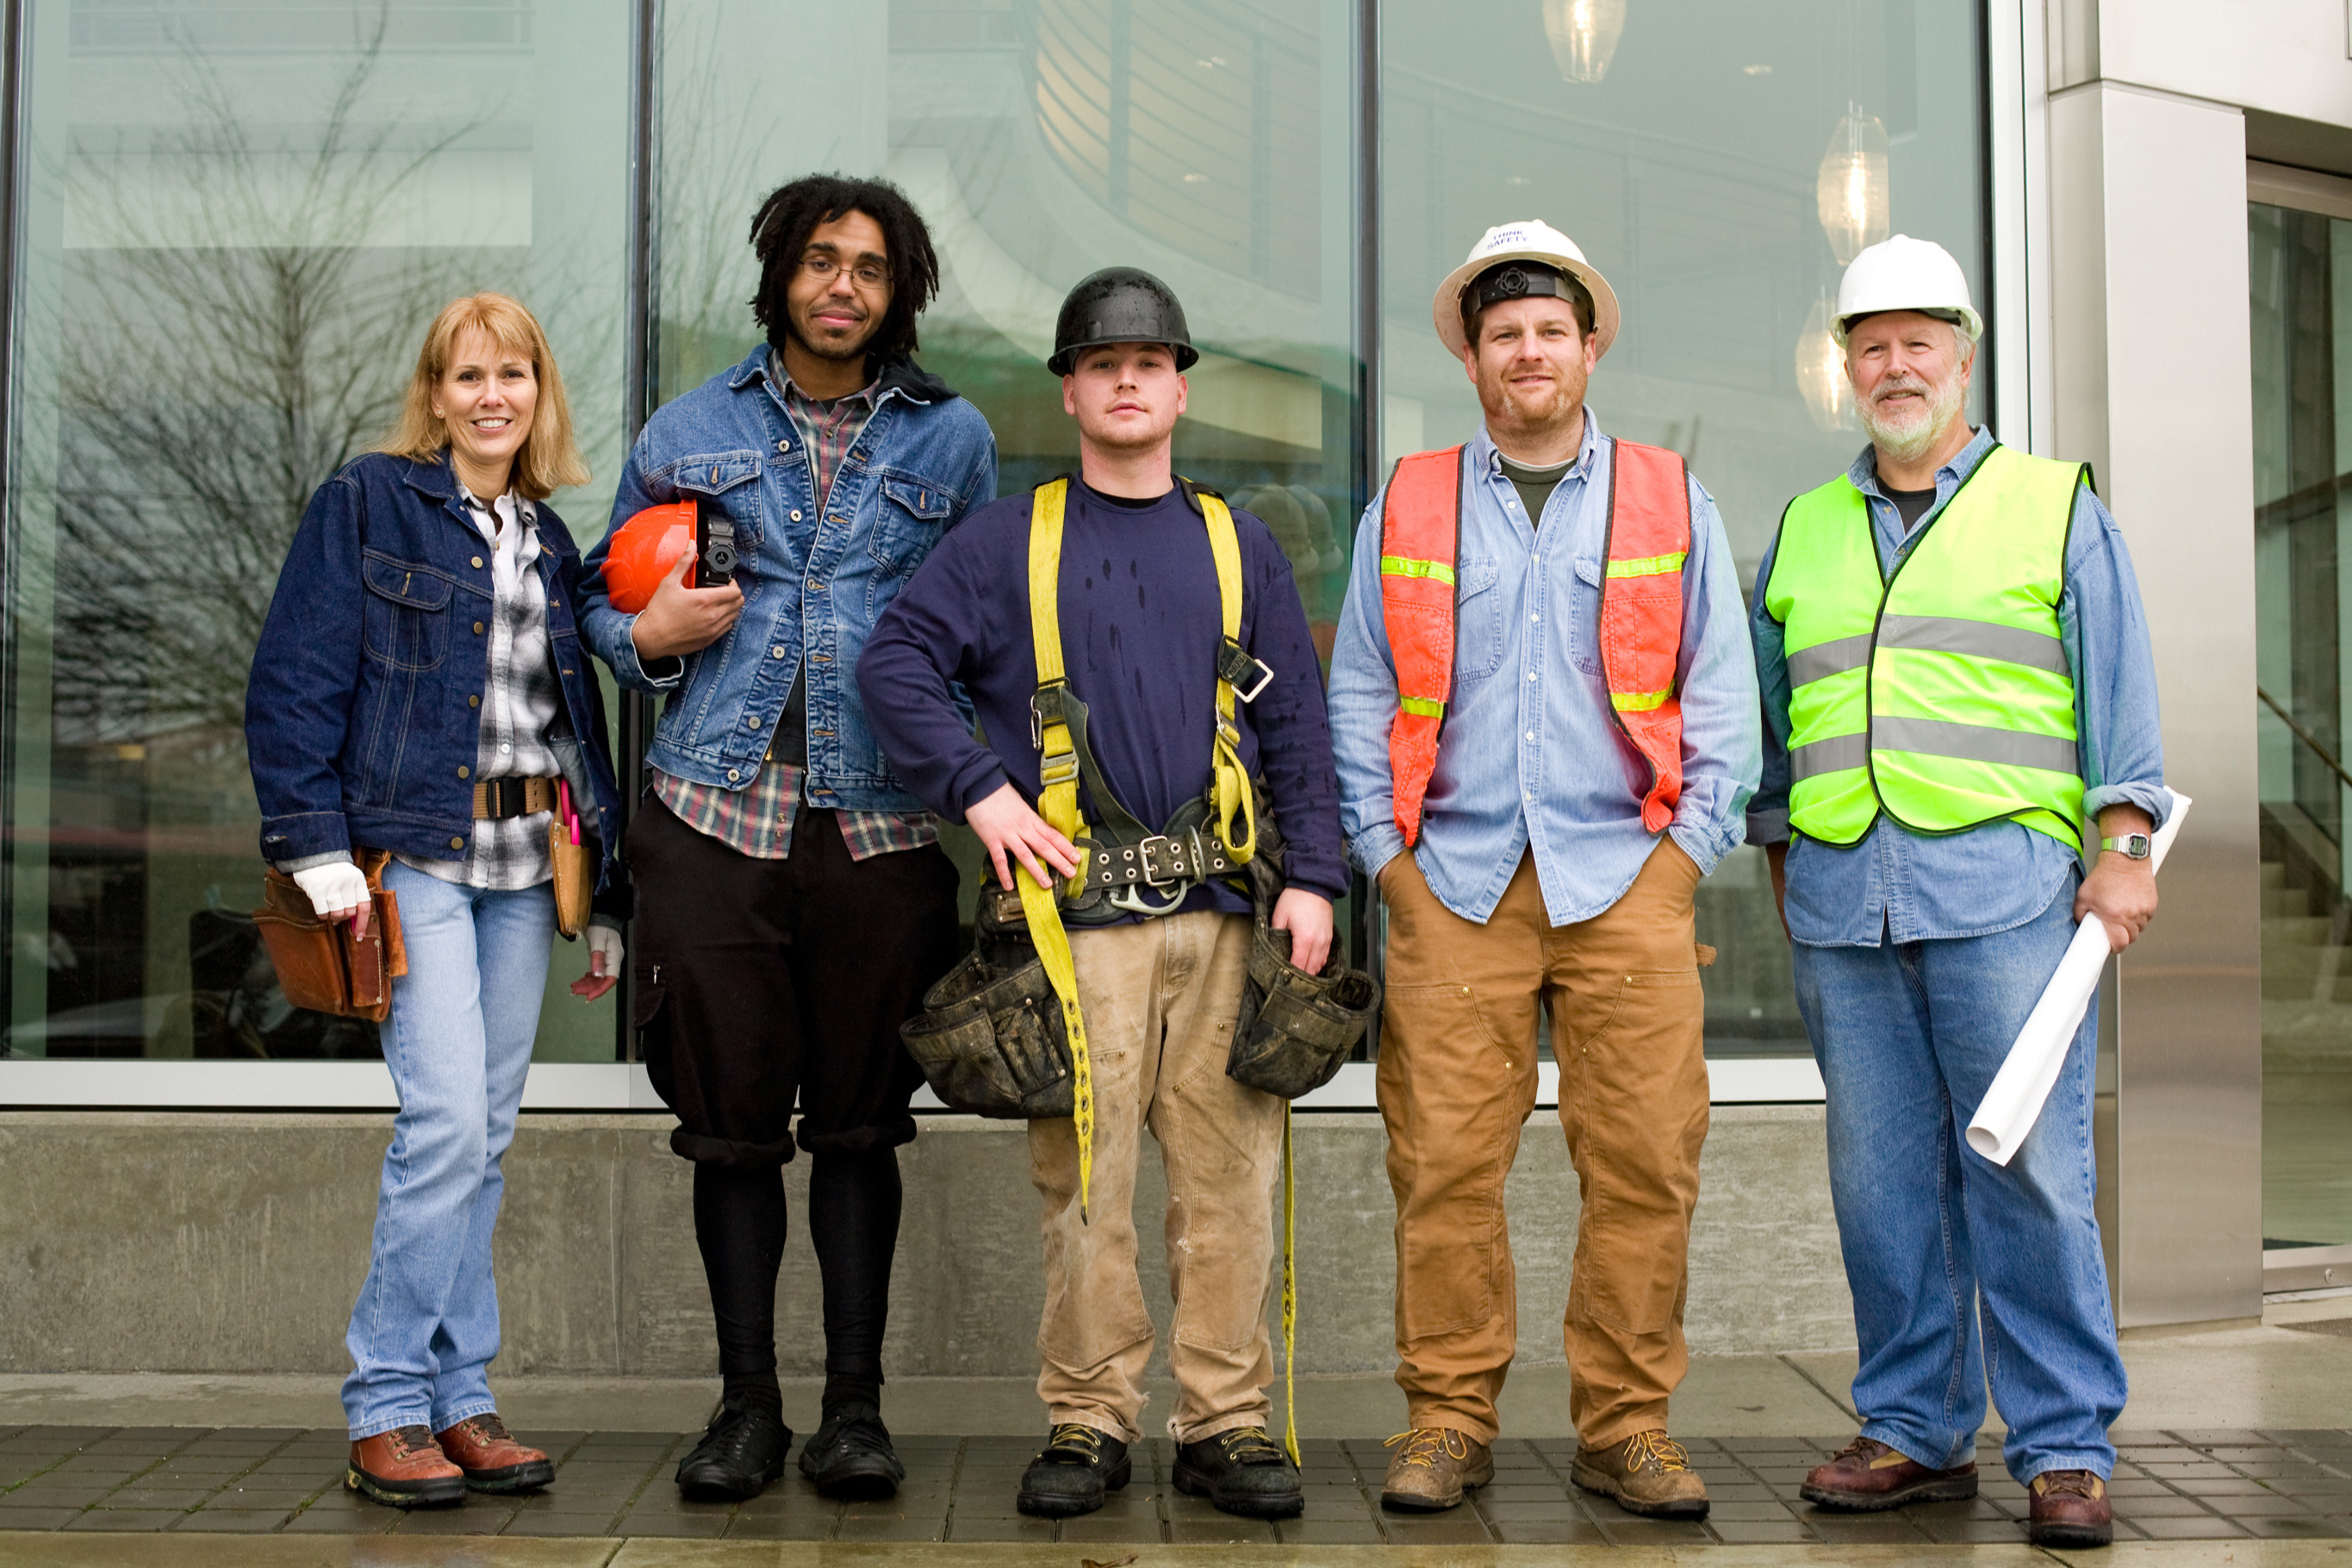 A group of contstruction workers, all eliglbe for WA Cares benefits, stand and smile at the camera. They are of various identities, presentations, and ages.